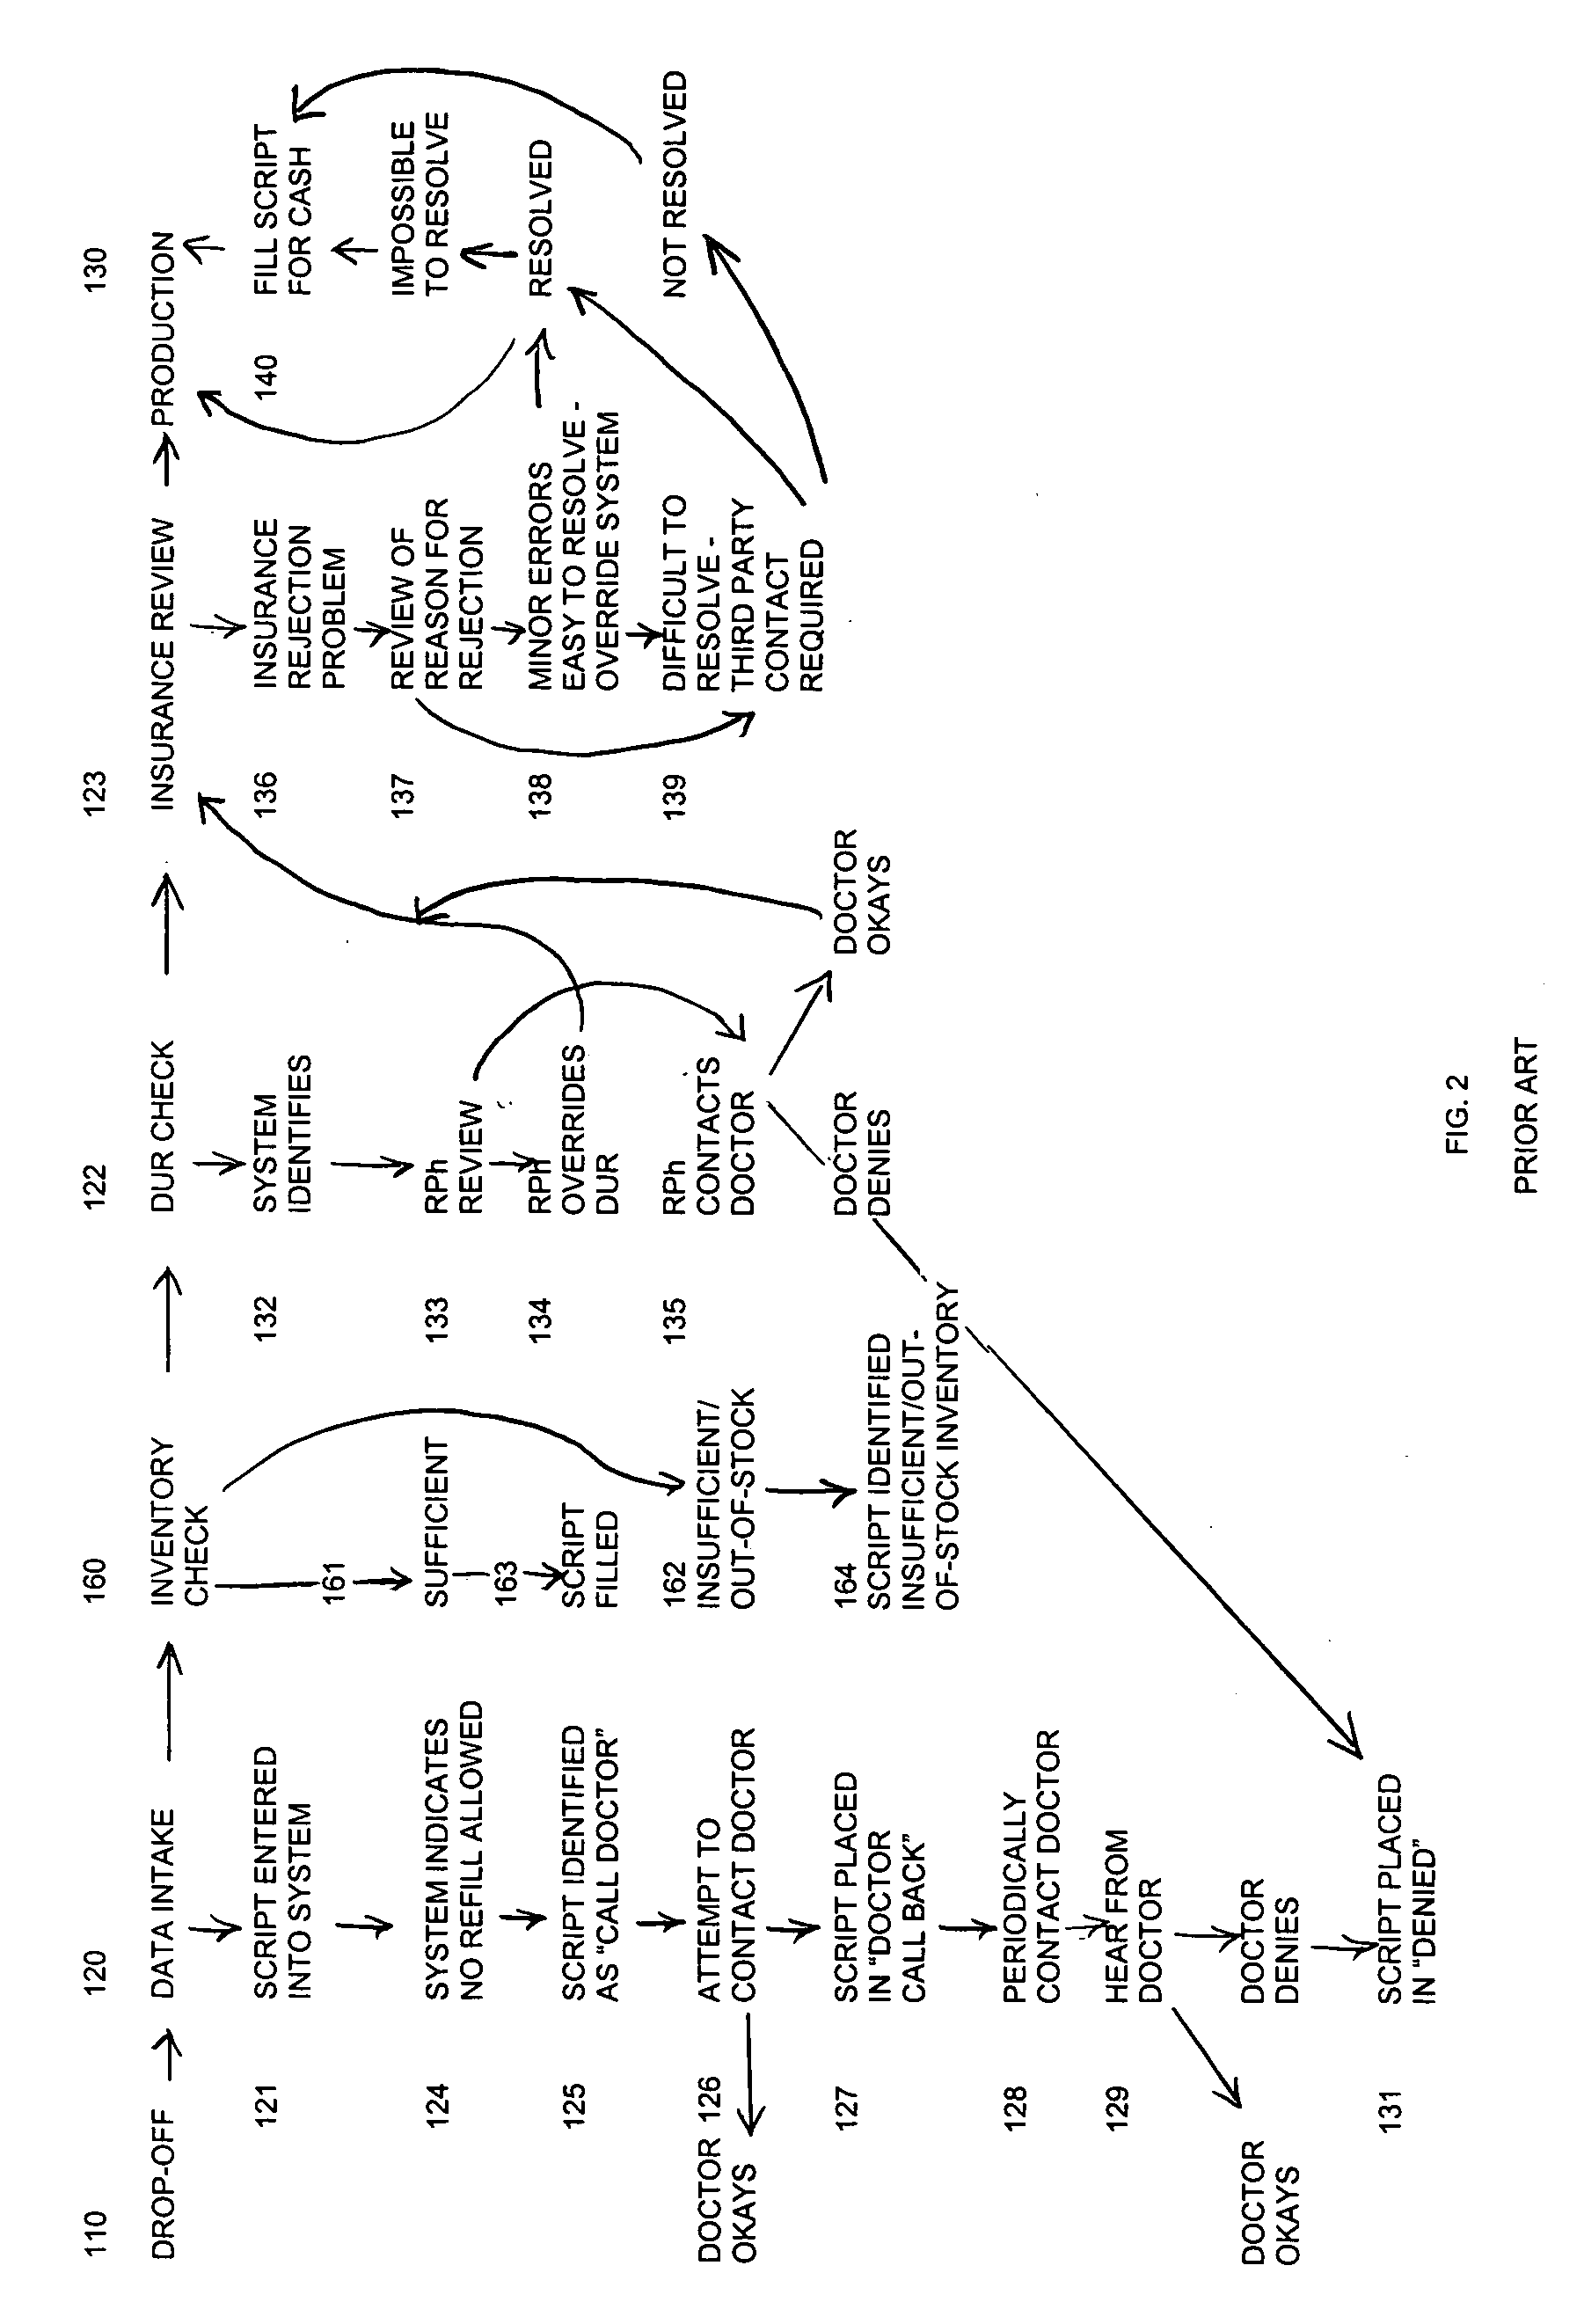 System and methods of providing pharmacy services